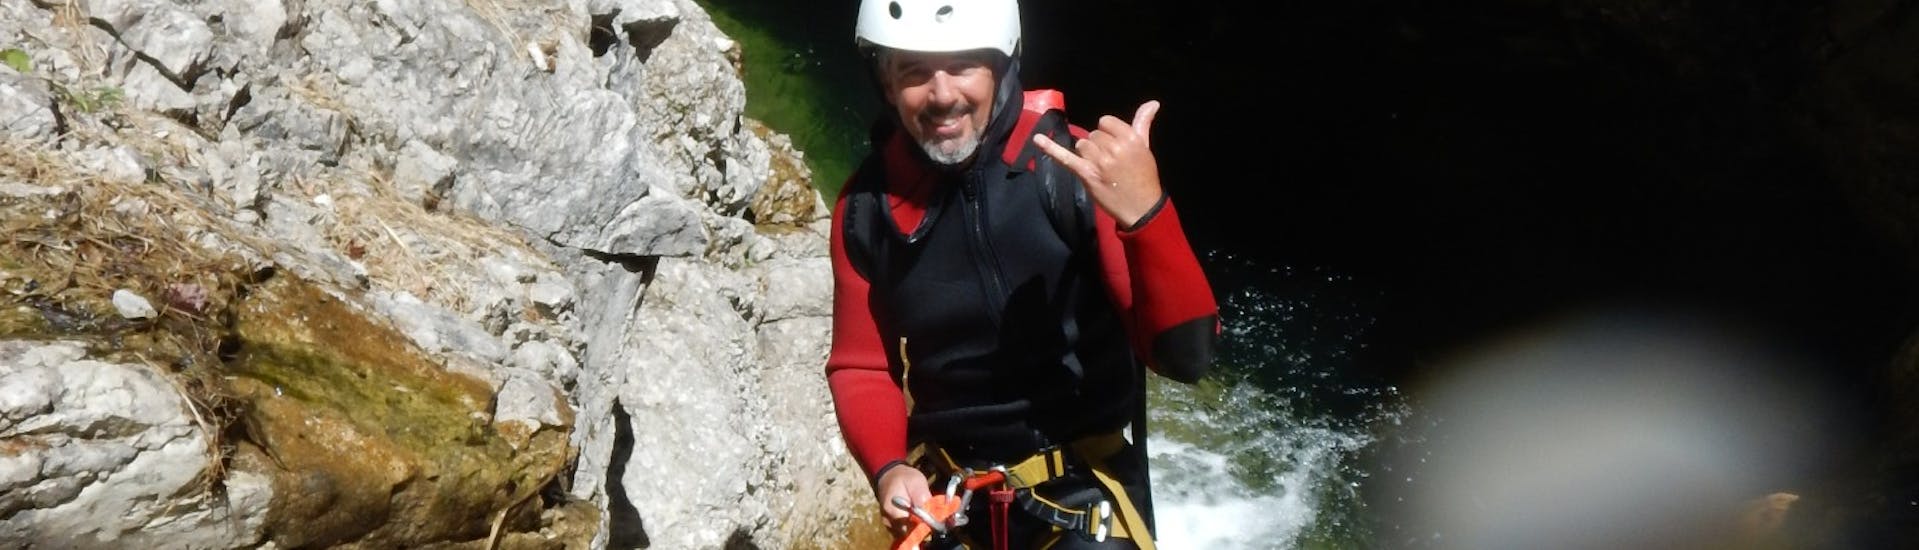 A customer abseiling independently at Canyoning Aktiv near Erpfendorf with Outdoor Guide Kaiserwinkl.